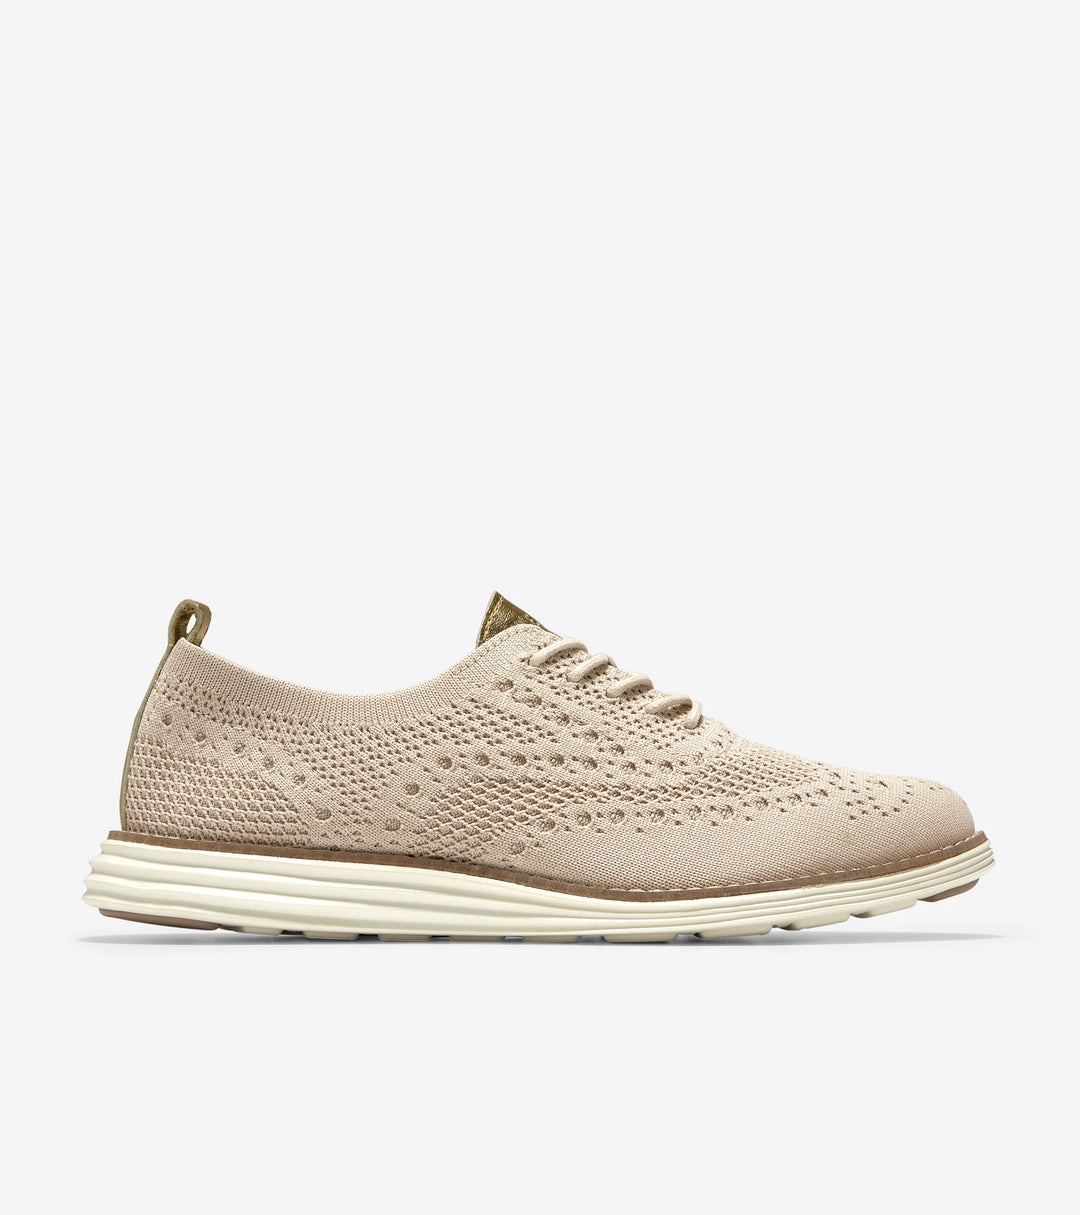 Women's Cole Haan Original Grand Stitchlite Wingstop Oxford Rye/Optic White - Orleans Shoe Co.